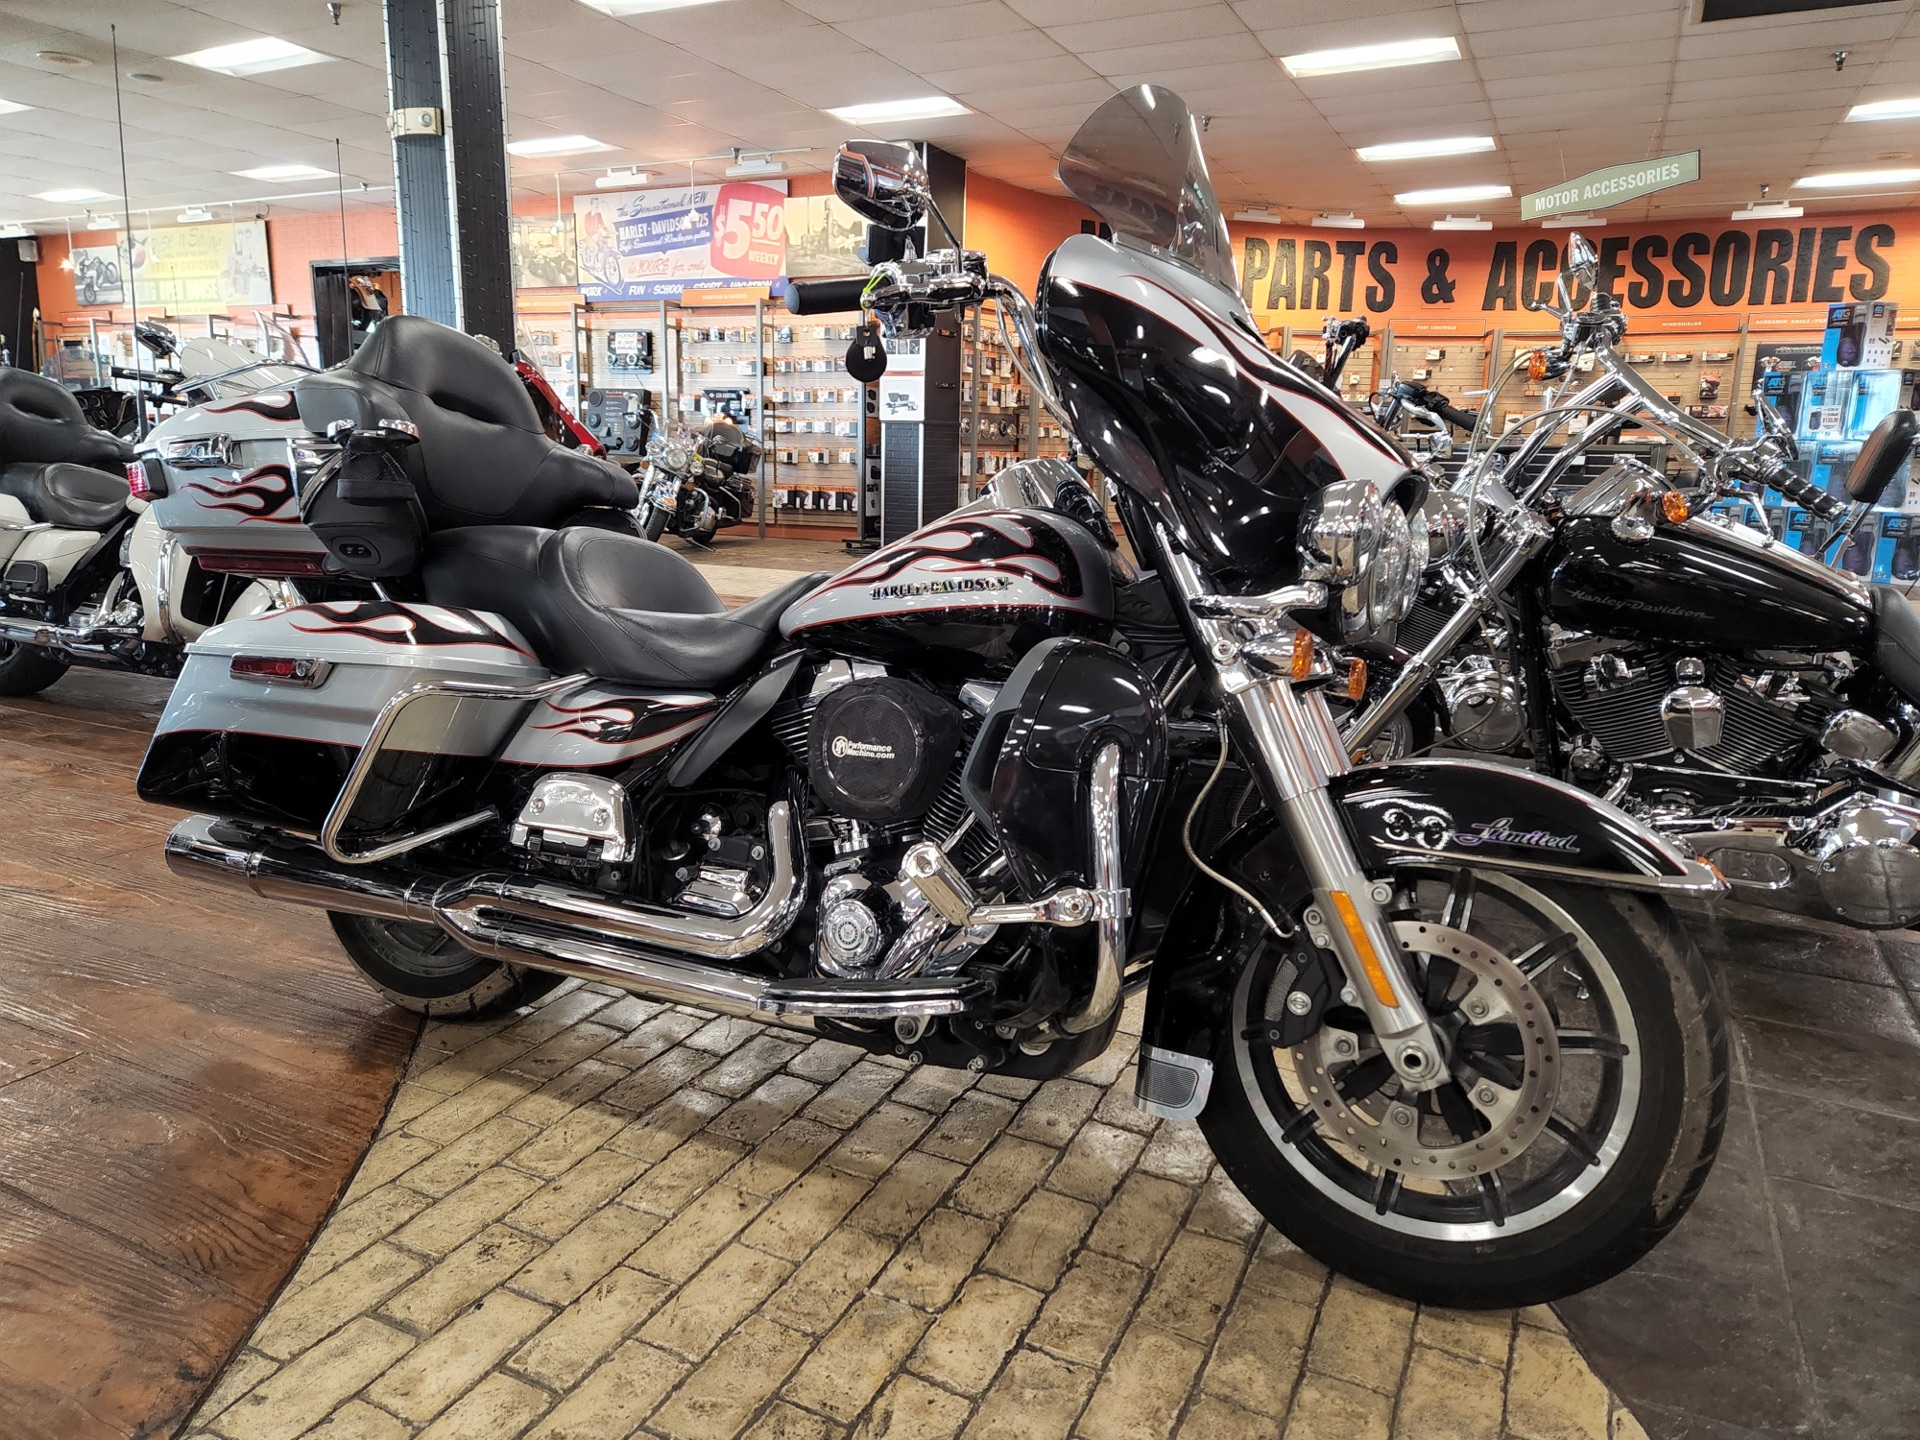 2015 Harley-Davidson Electra Glide Ultra Limited in Marion, Illinois - Photo 2